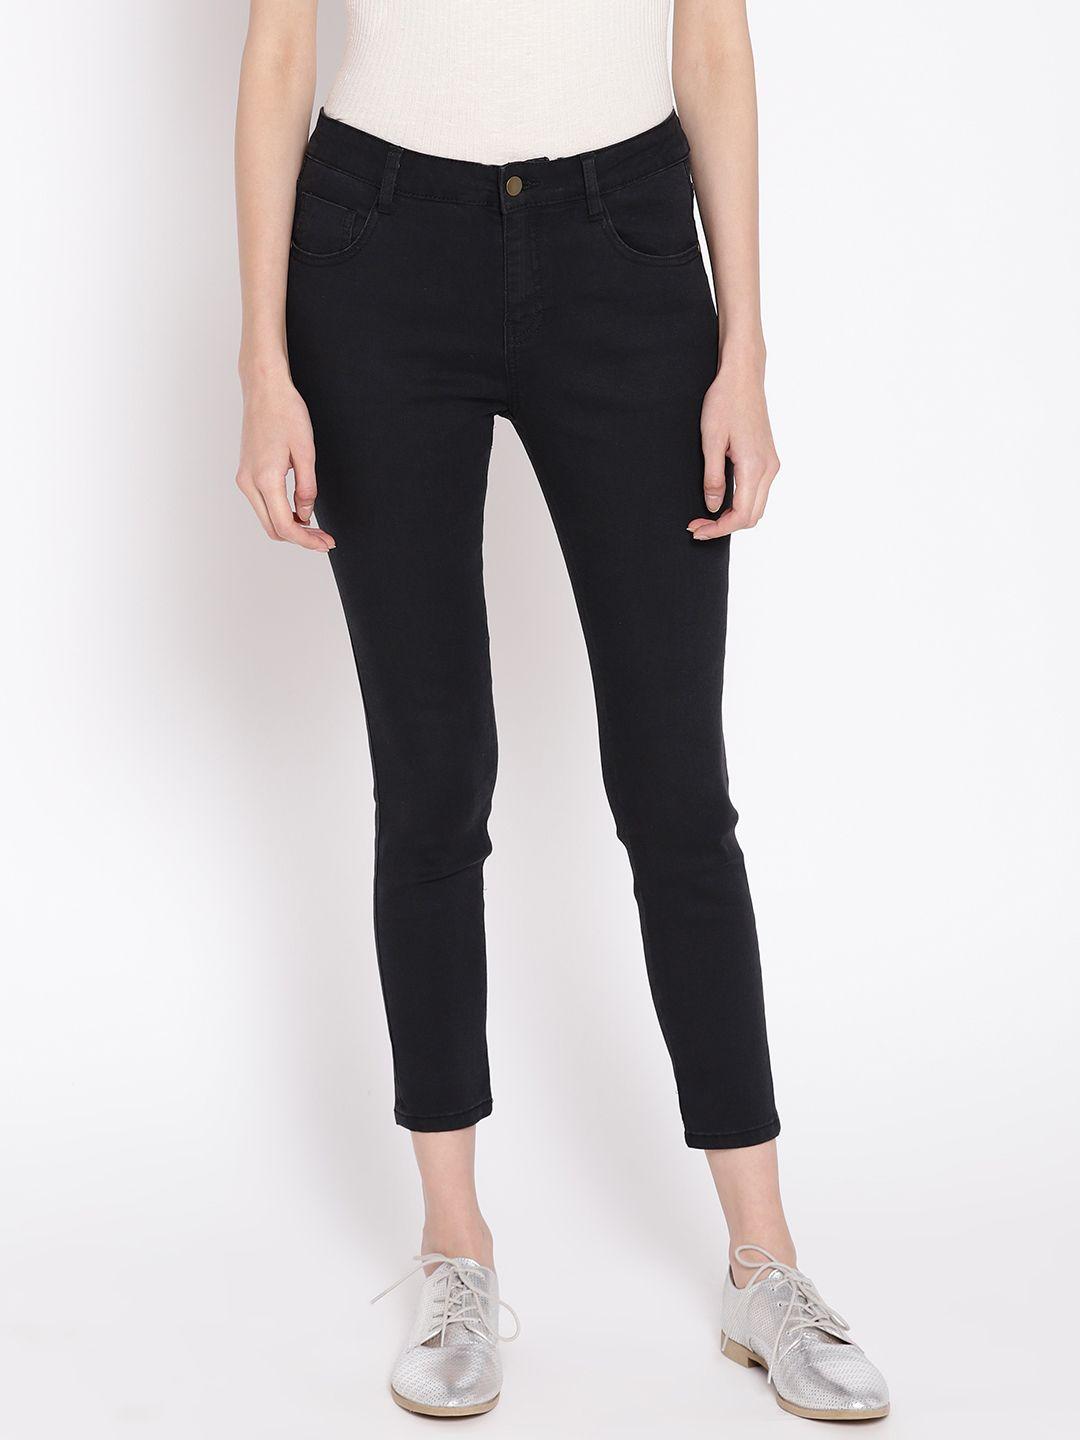 dressberry-women-black-skinny-fit-mid-rise-clean-look-cropped-stretchable-jeans